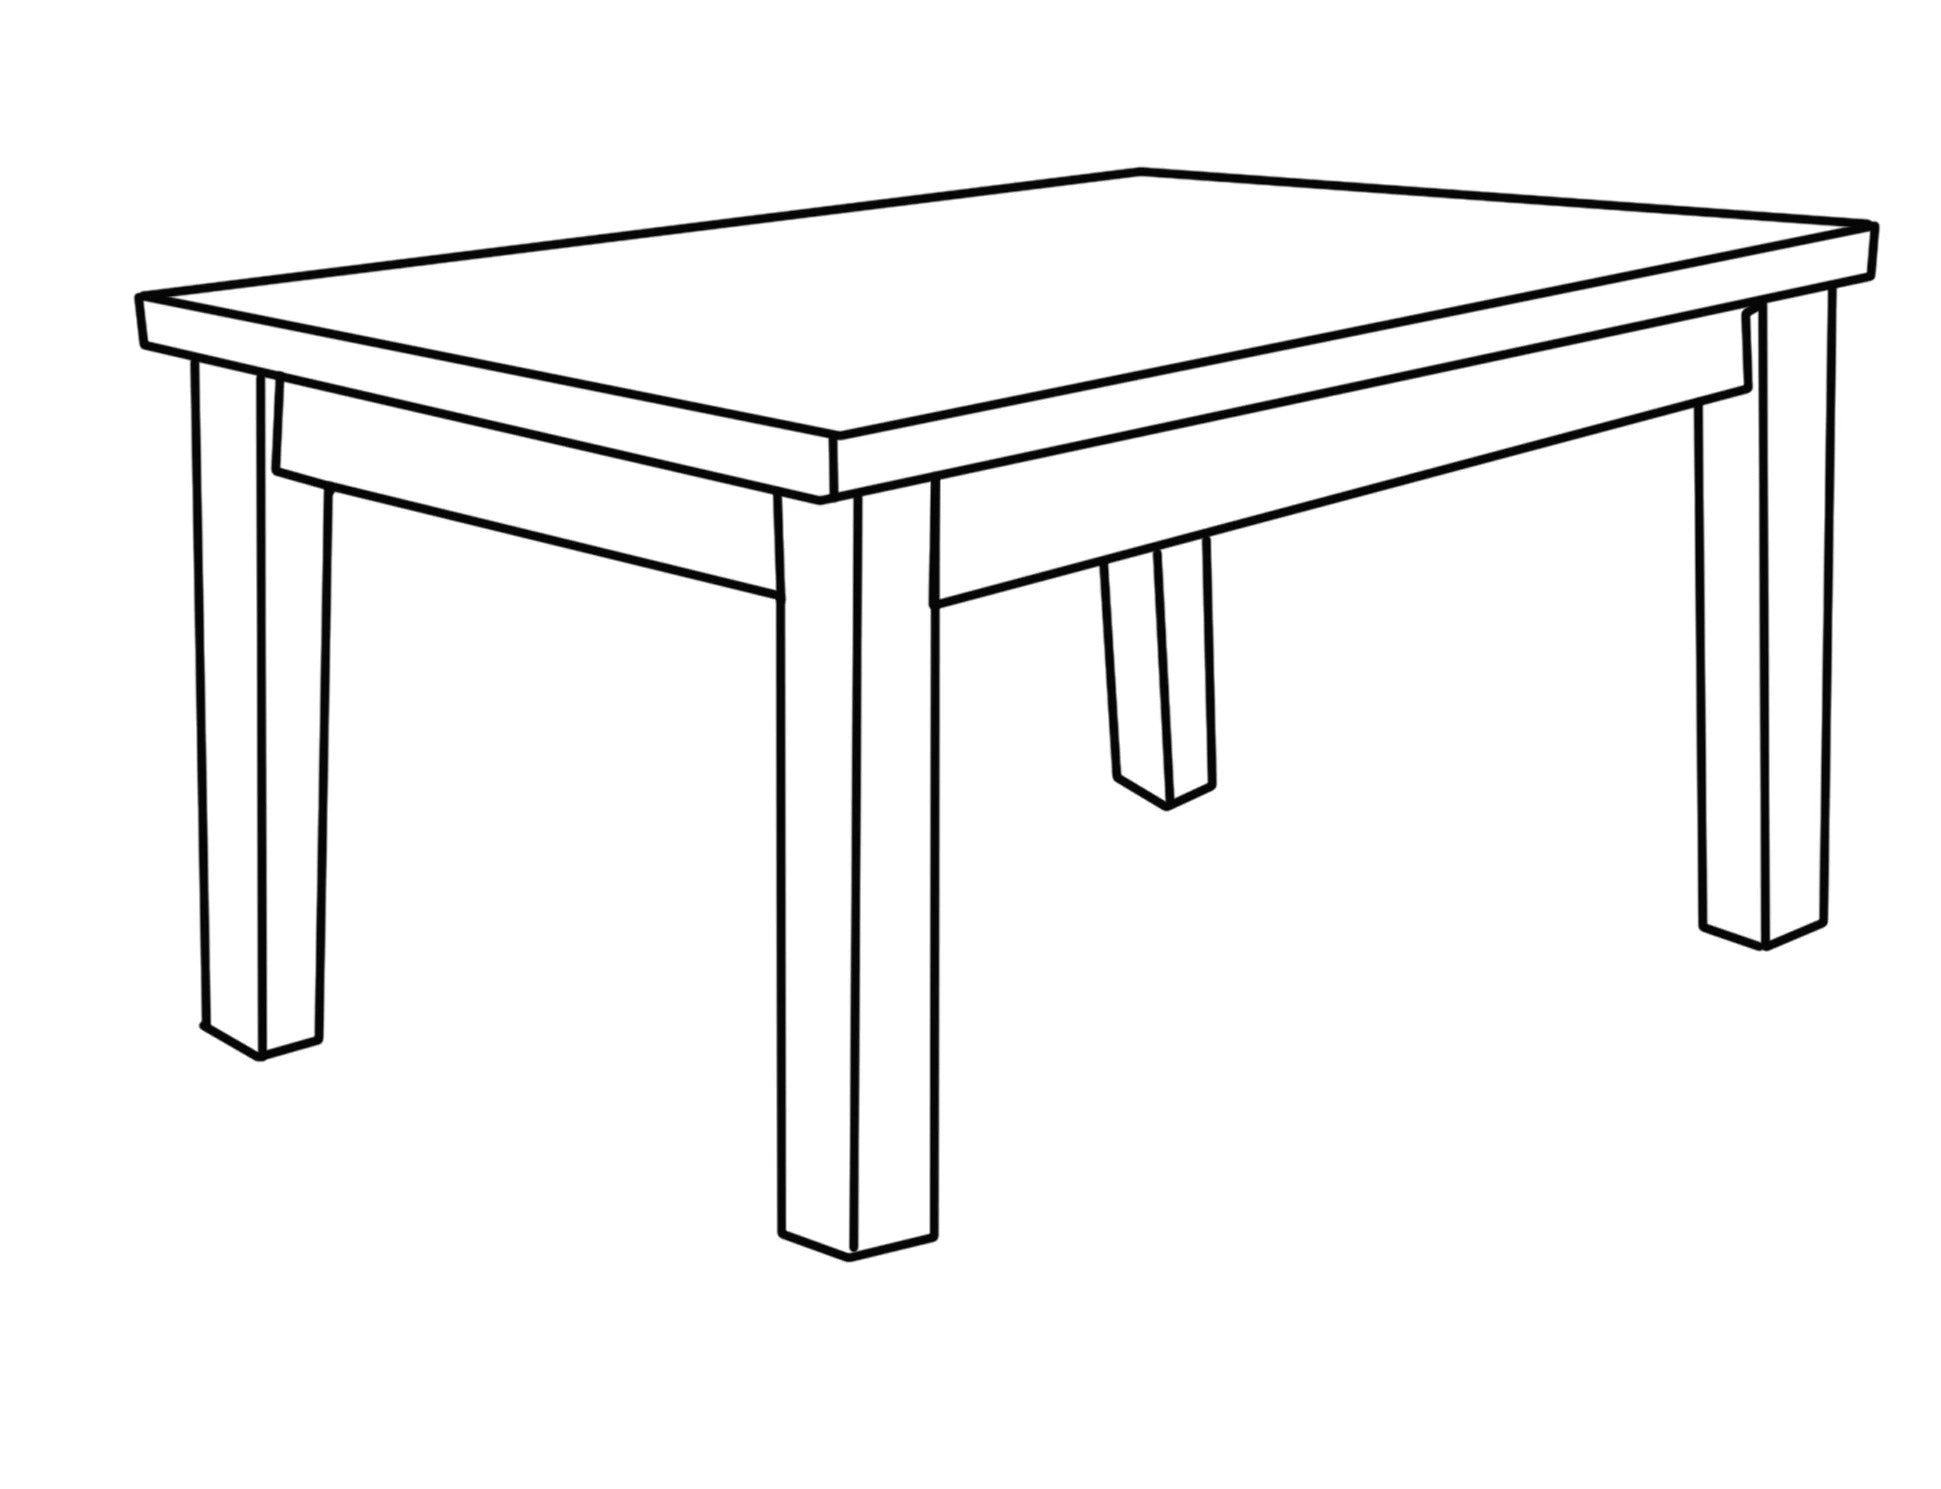 Rectangle Table Illustration